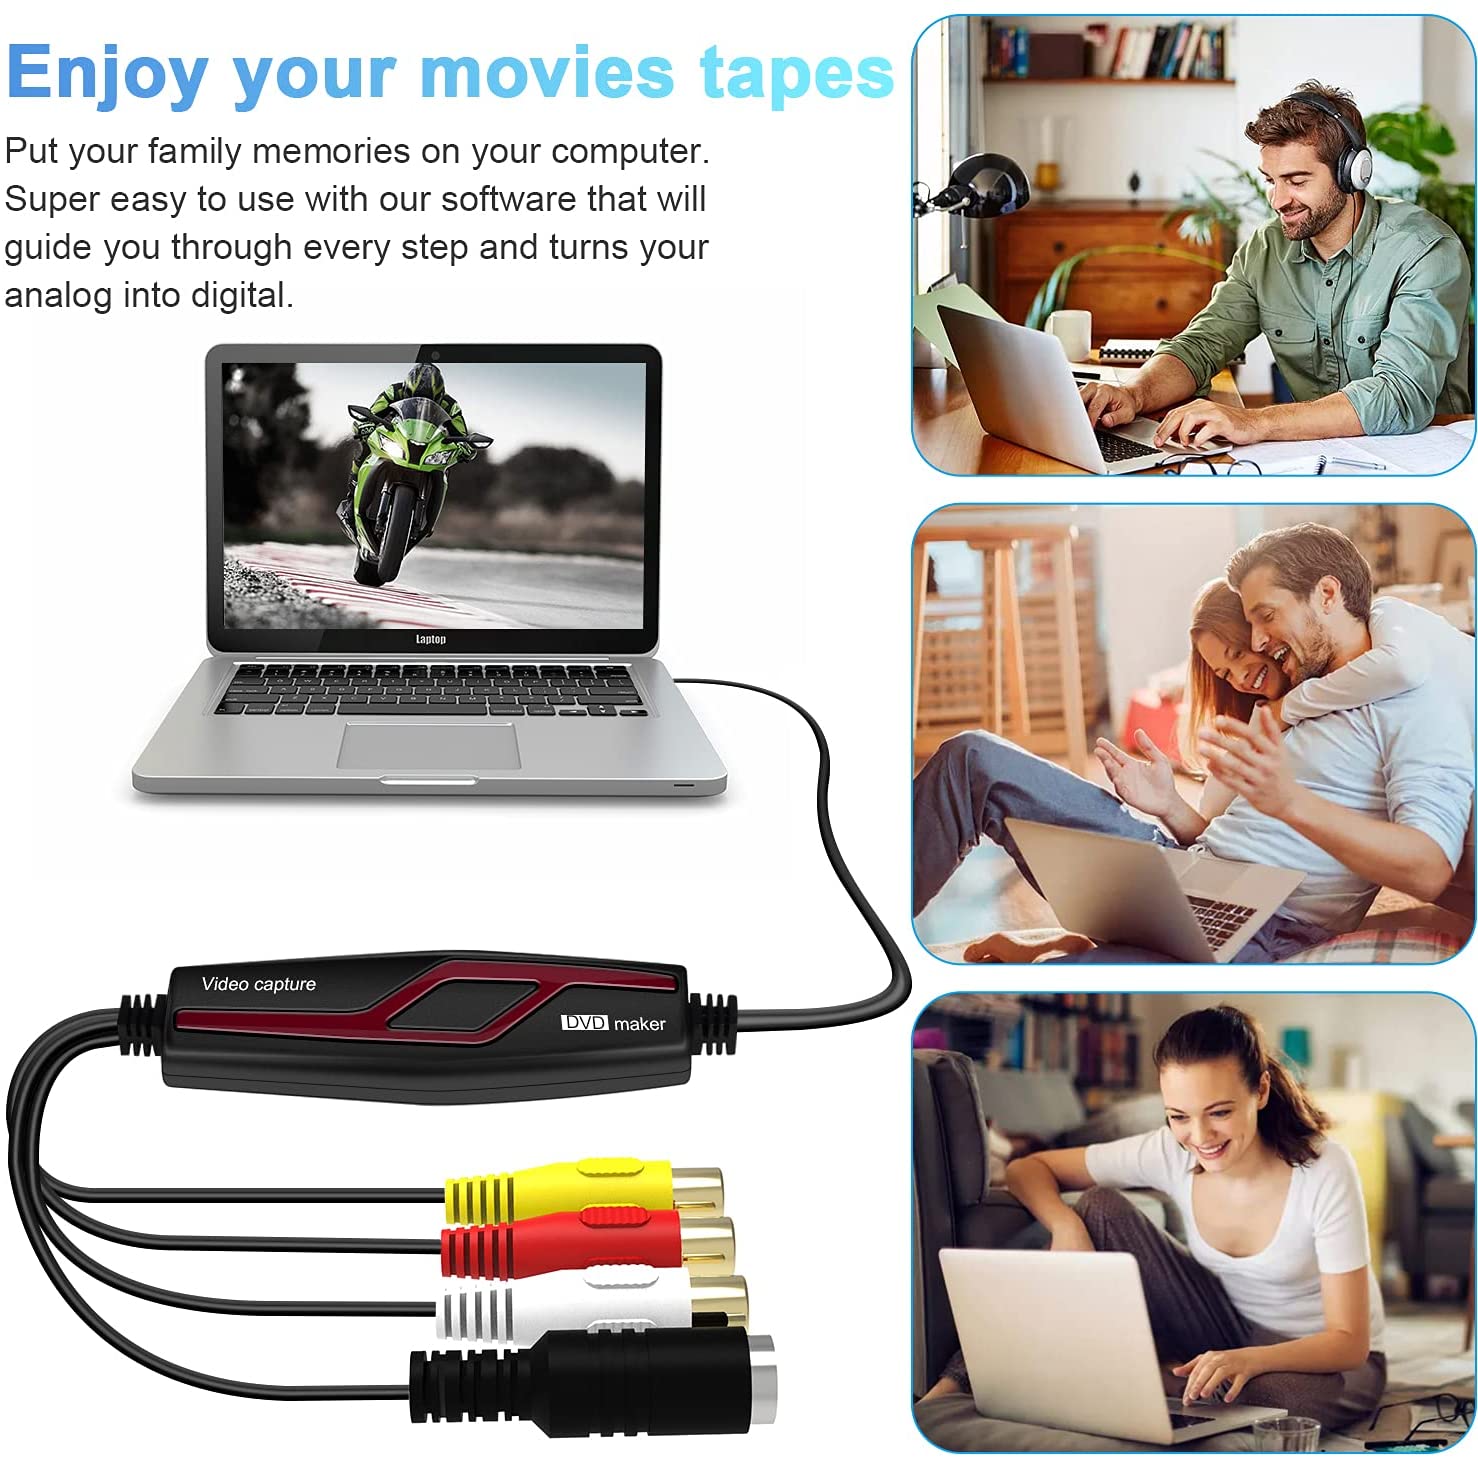 DIGITNOW! Video Capture Vhs to Digital Converter Records Video Tapes to  Memory Card.